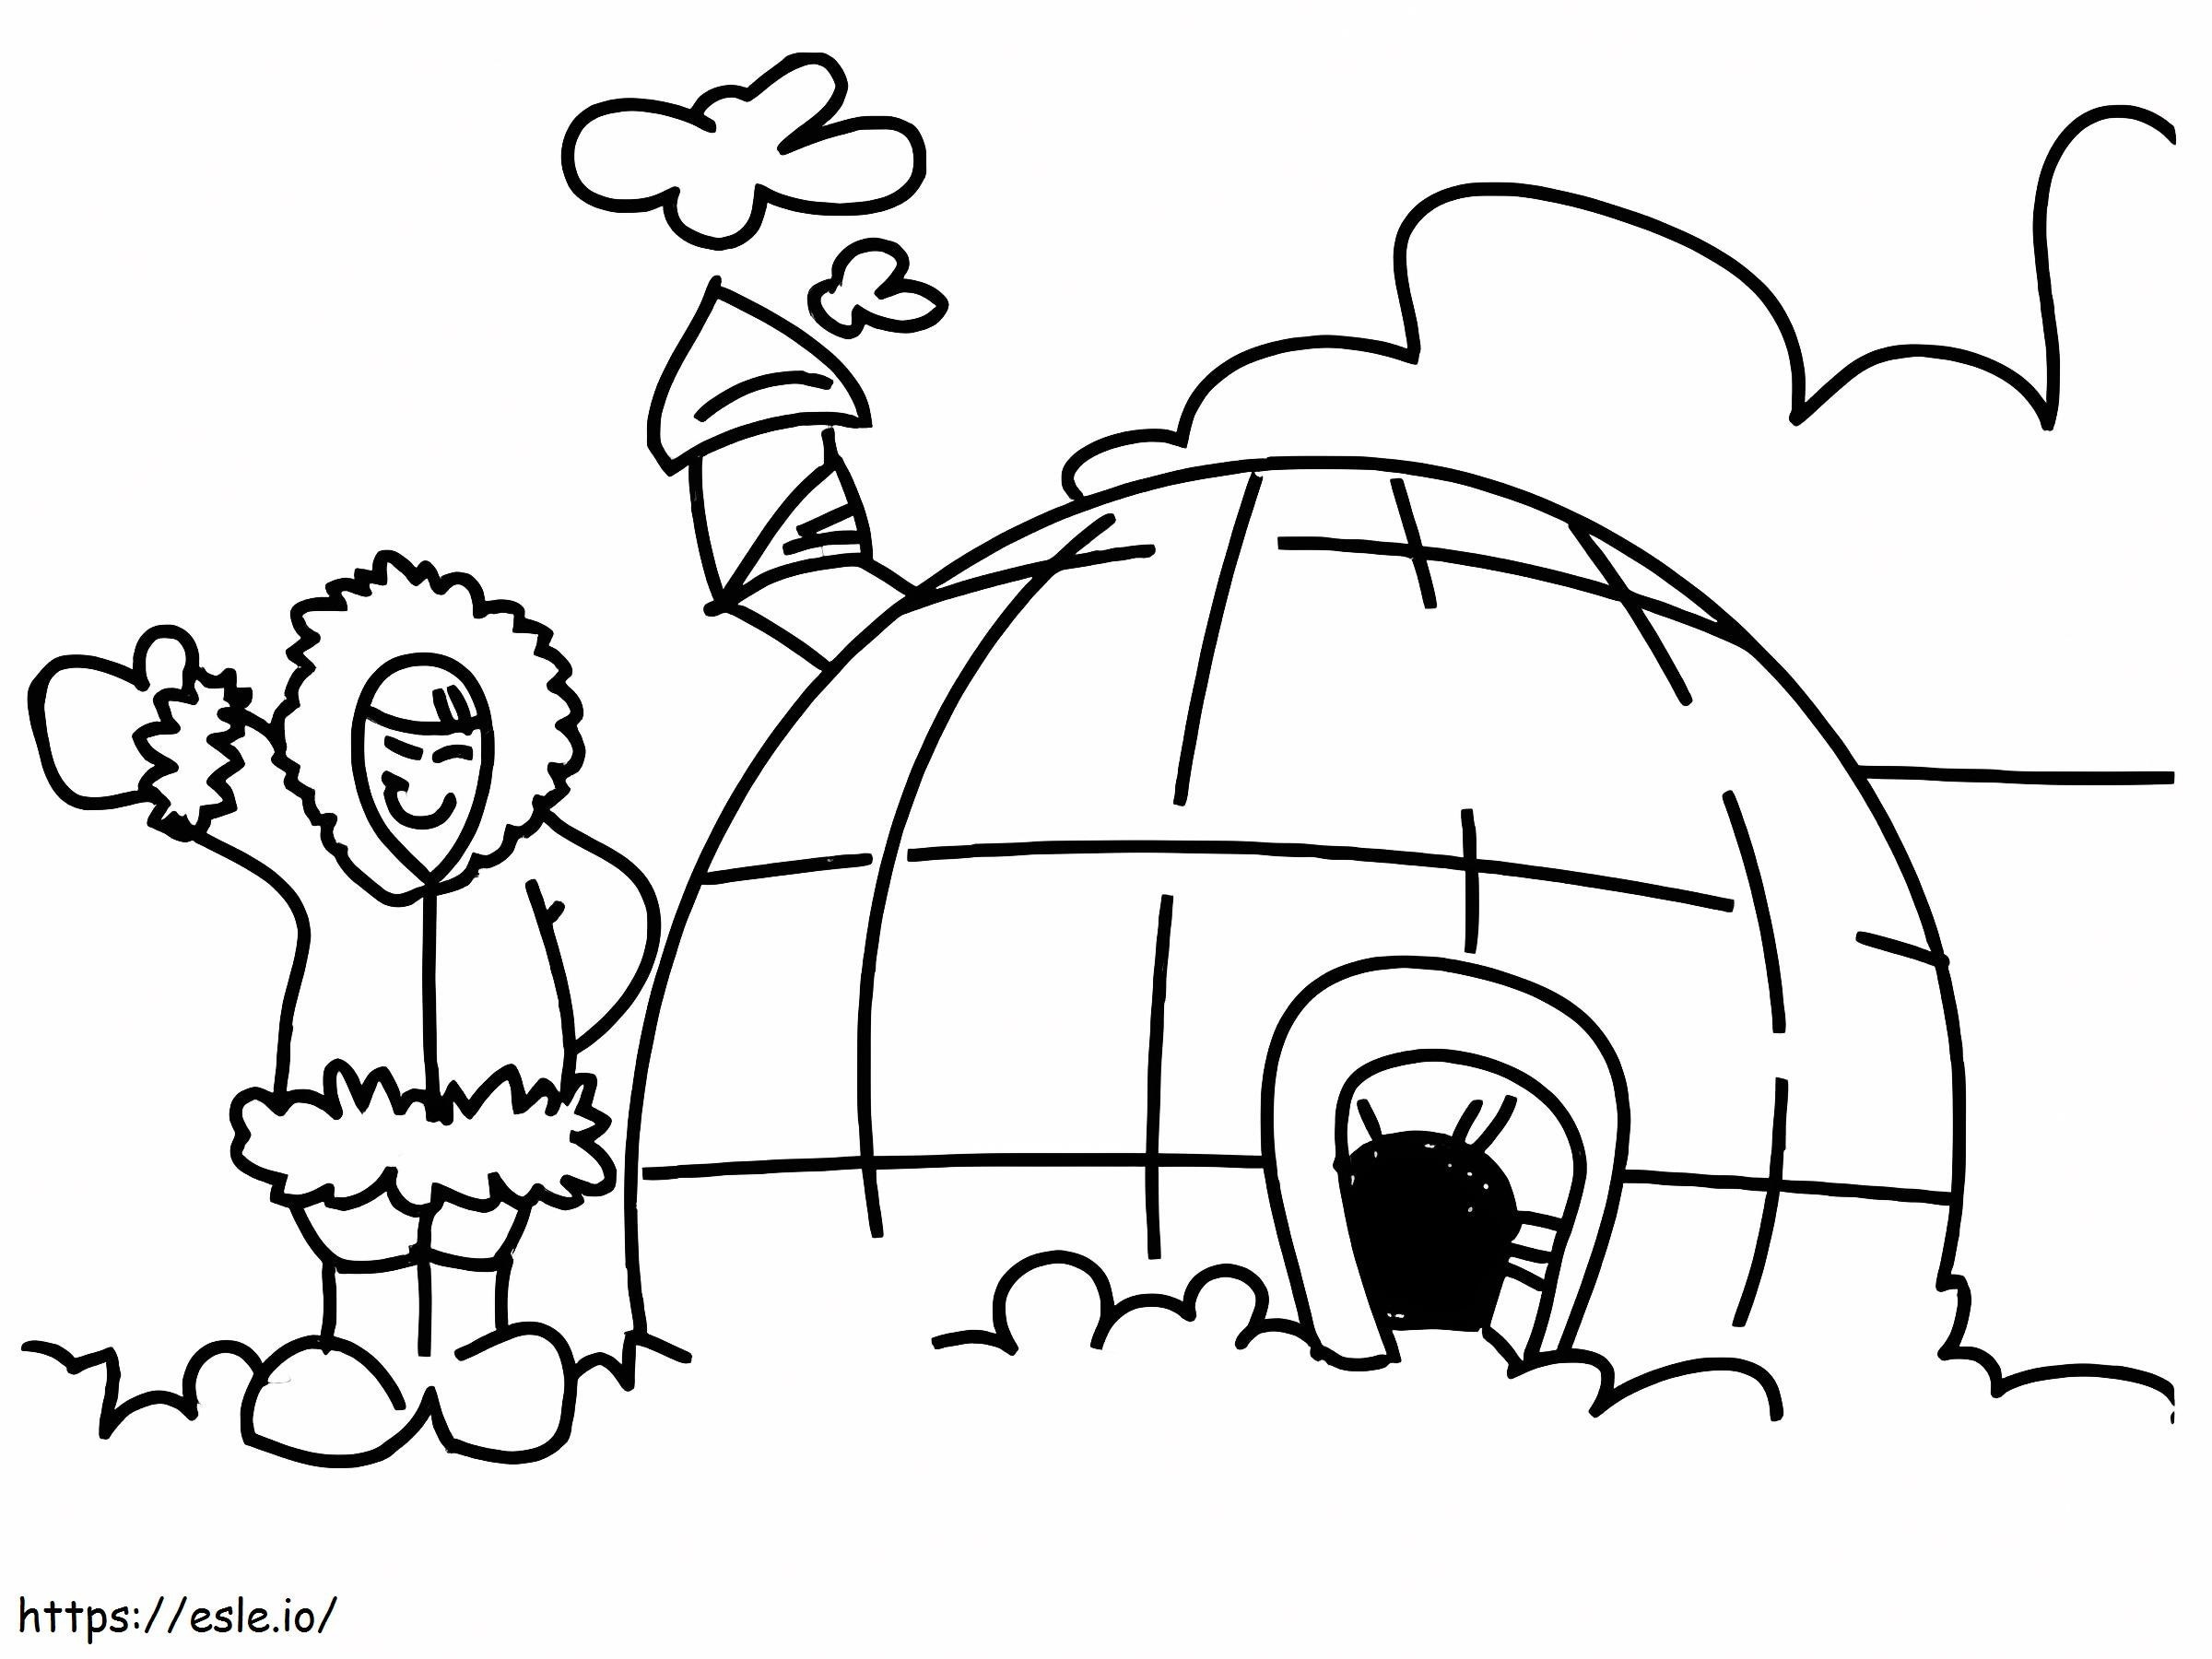 Igloo 17 coloring page